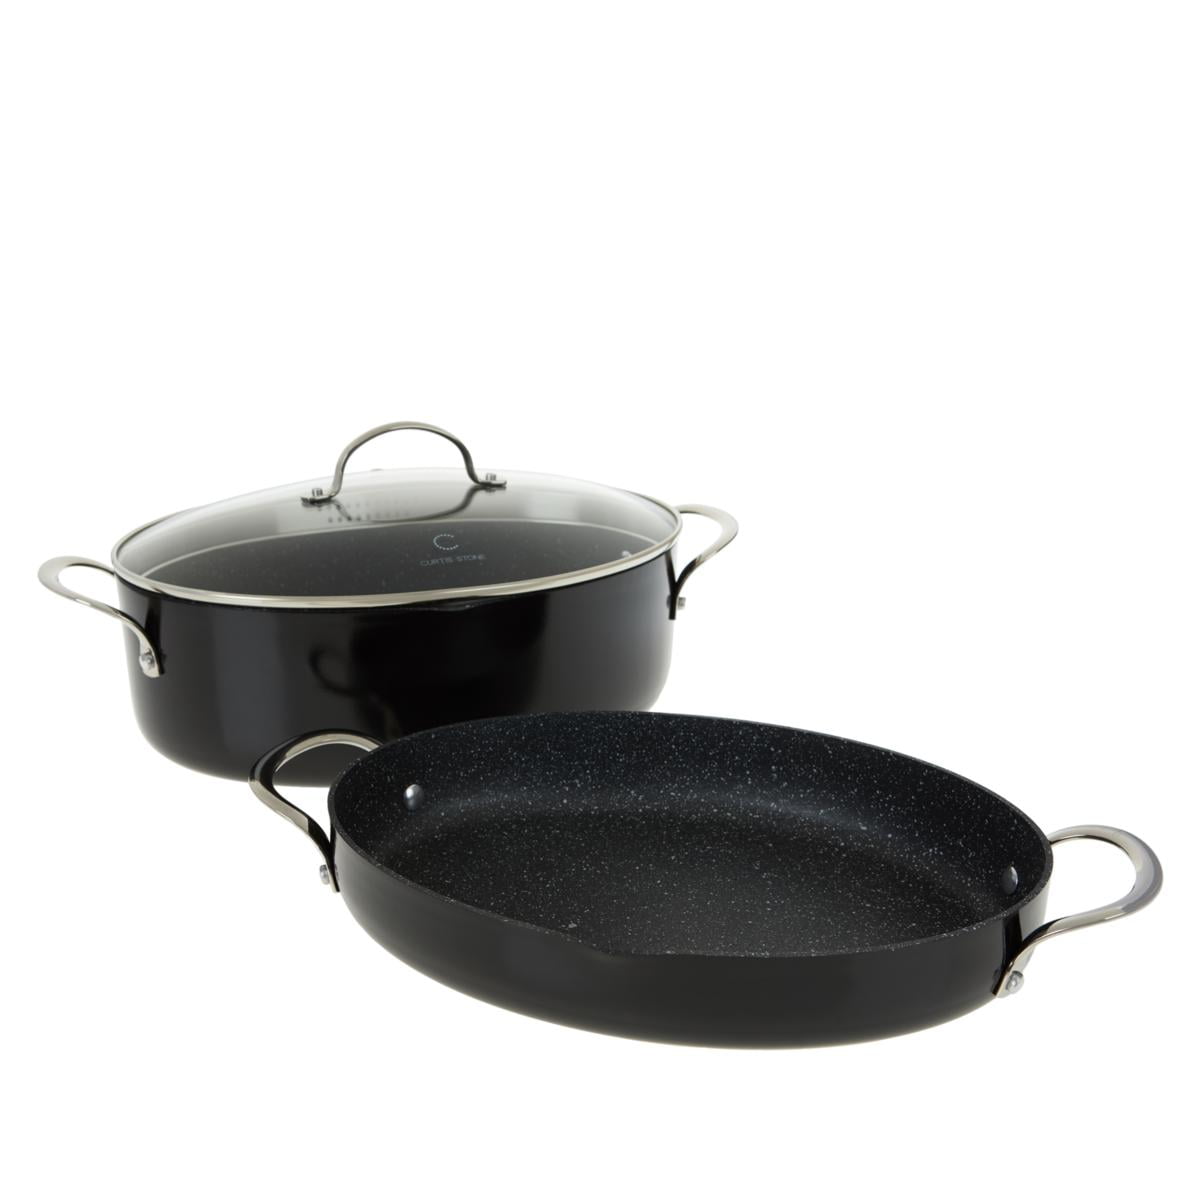 Curtis Stone 3-piece Oval Cookware Set Model 729-514 